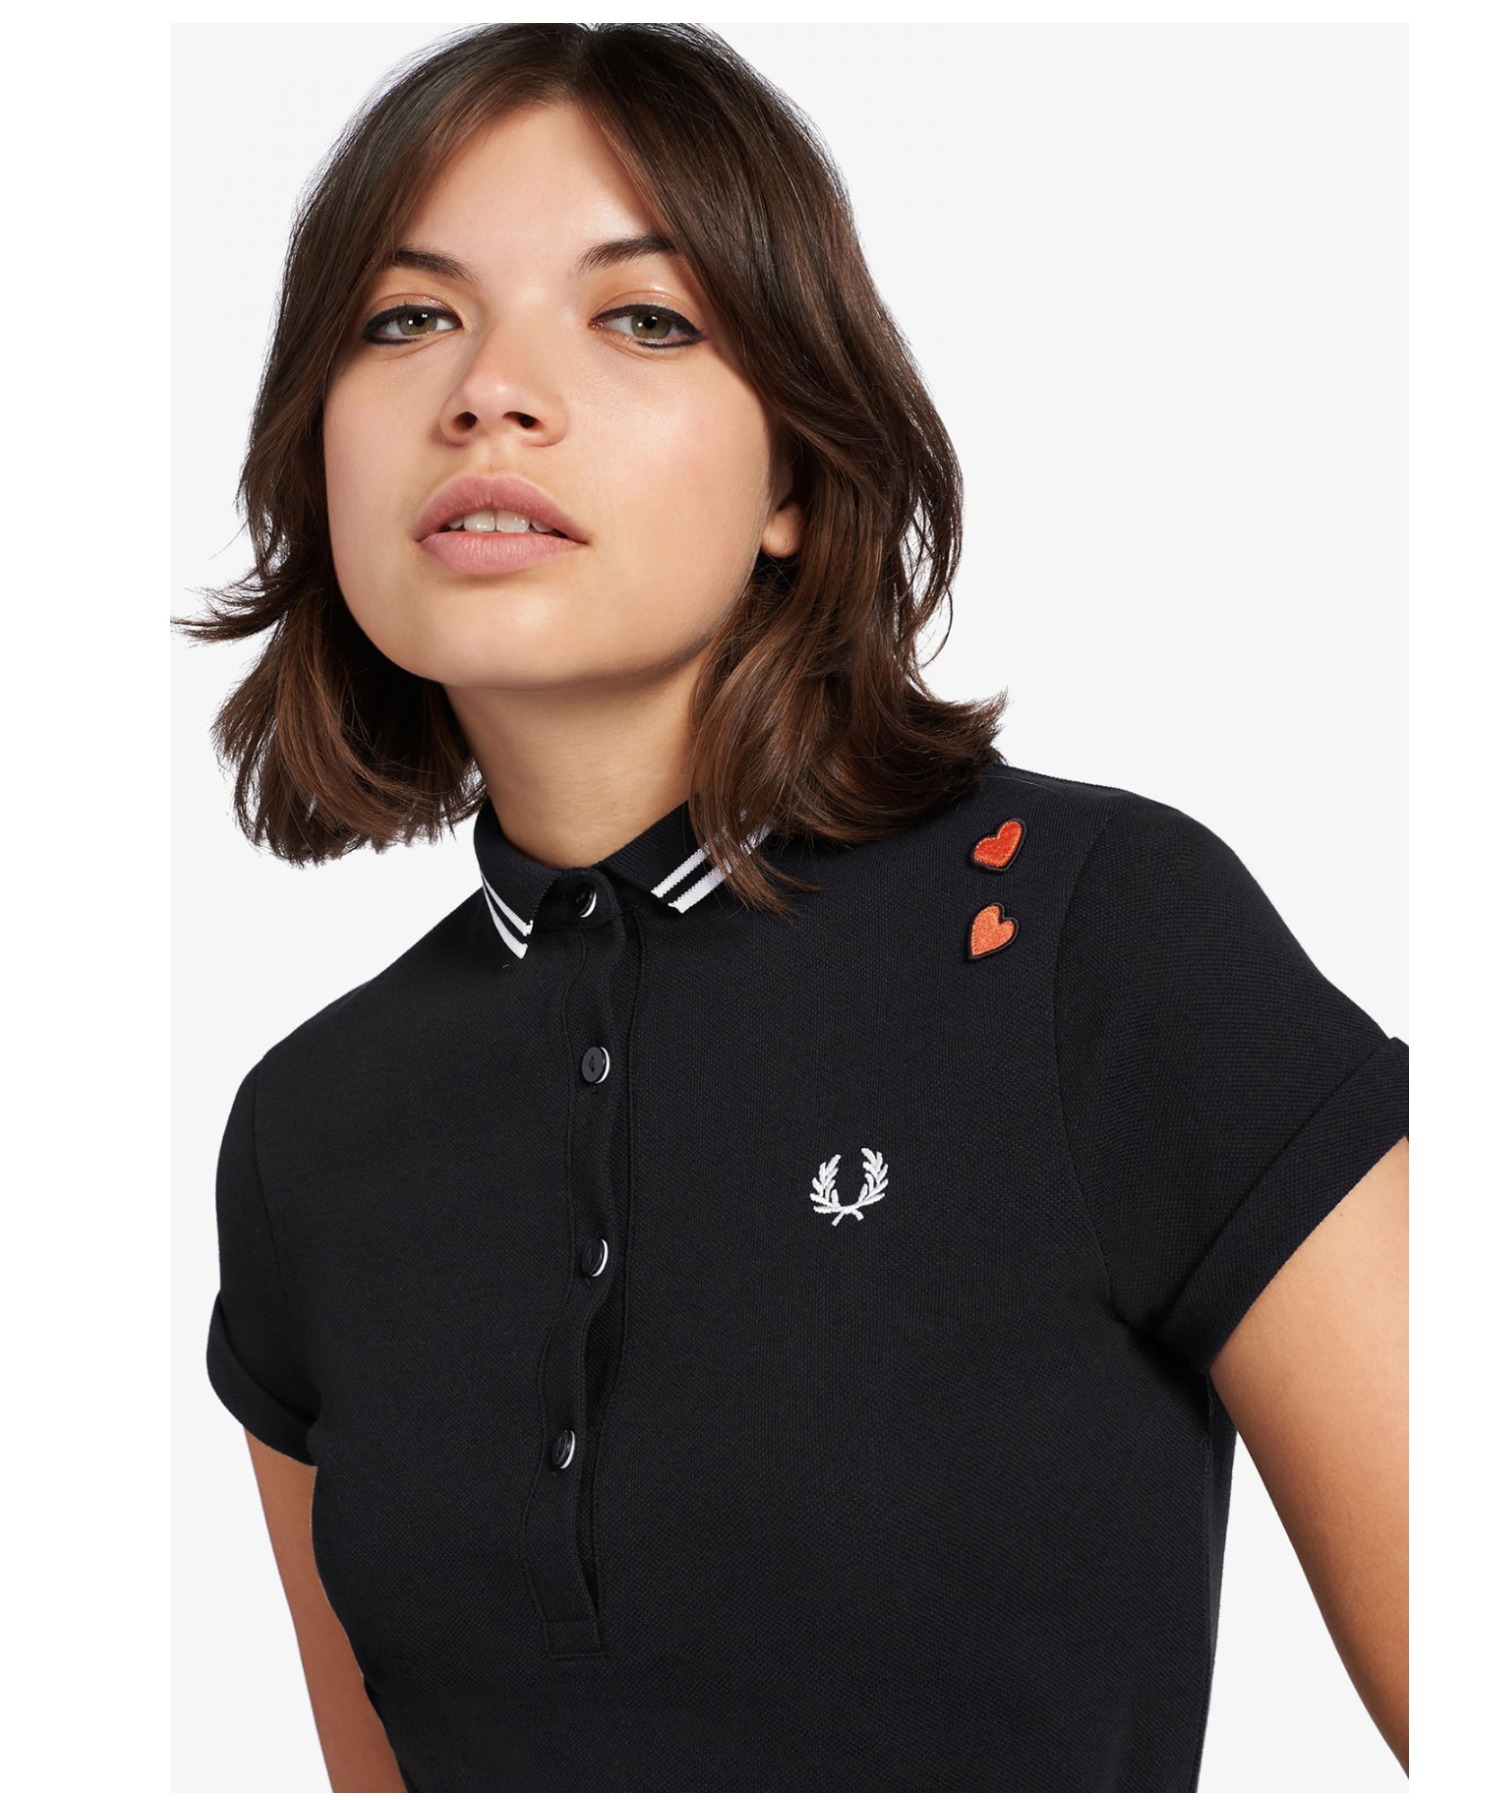 FRED PERRYAmy 安心の定価販売 【美品】 Winehouse Shirt Fred Perry